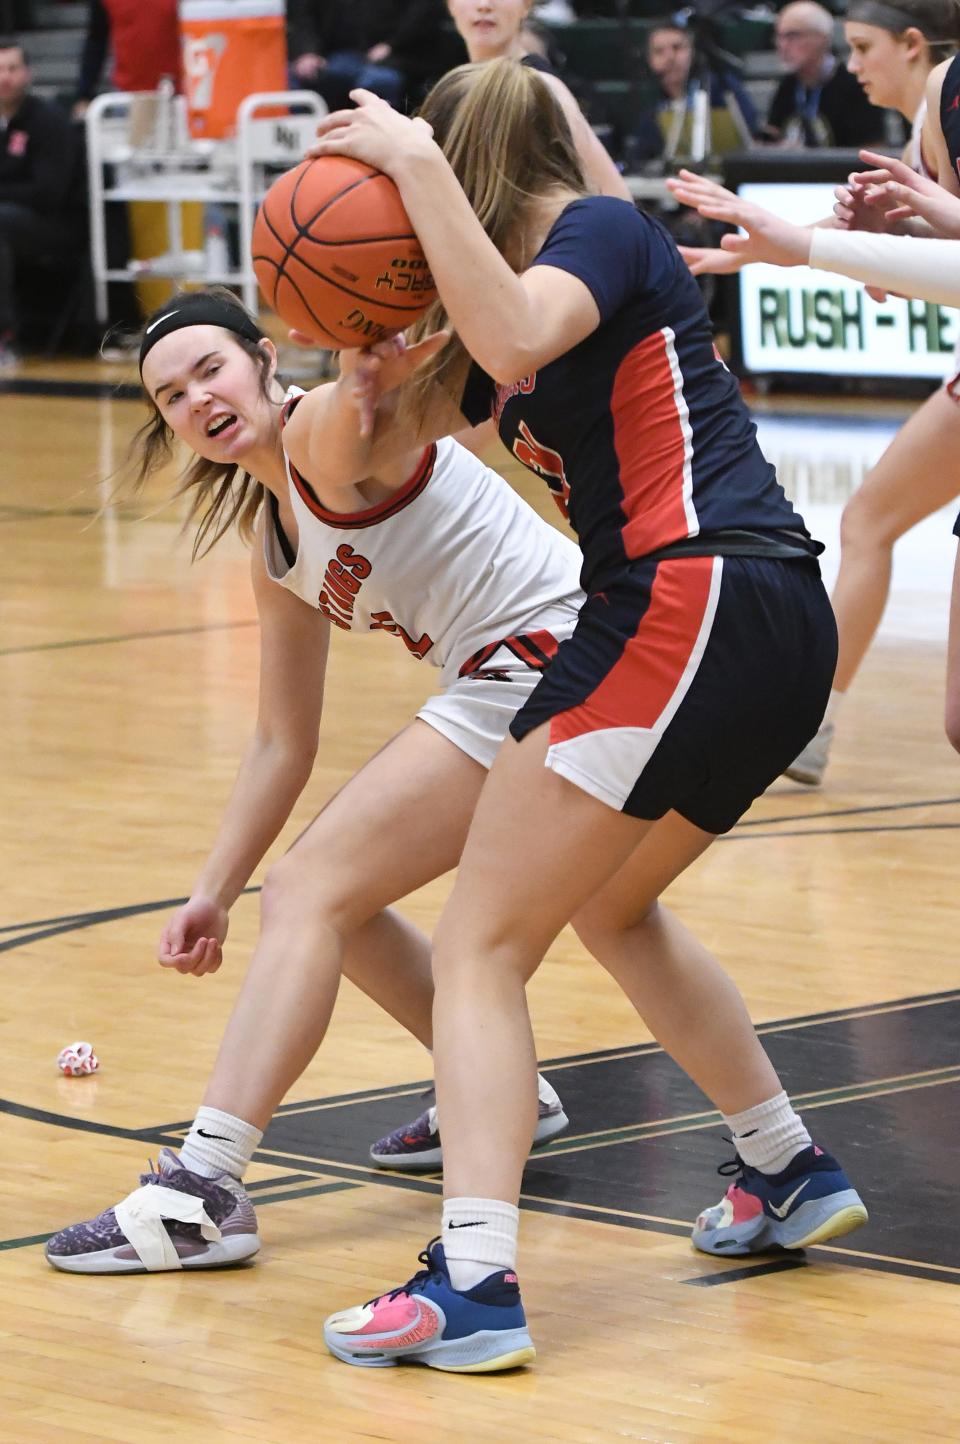 Chelsie Tyler of Dansville reaches in and tries to knock the ball awaye from Madelyn Moore of Dansville.